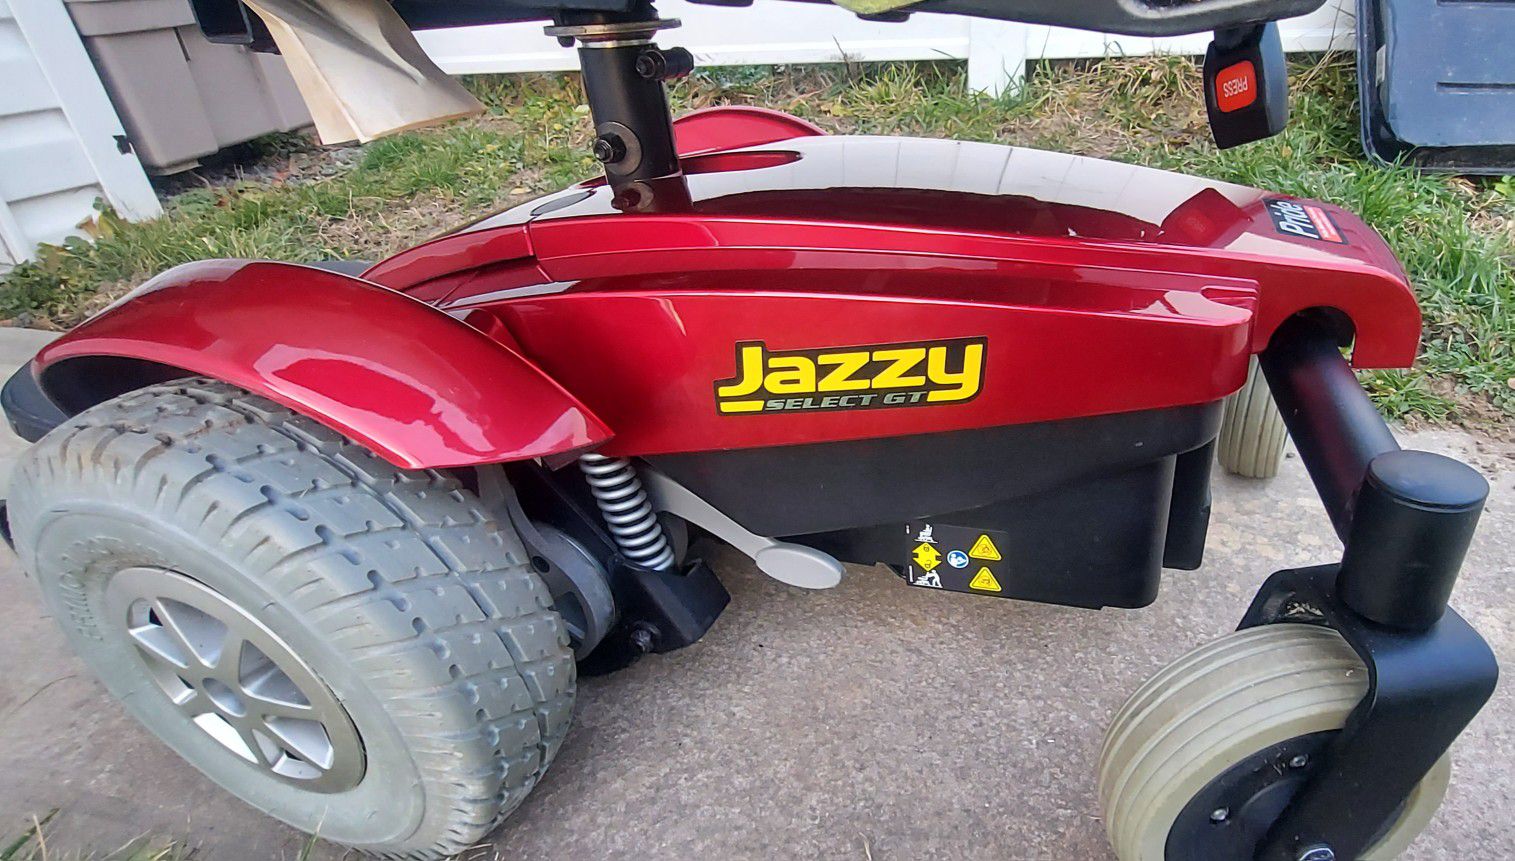 Jazzy Power Scooter 